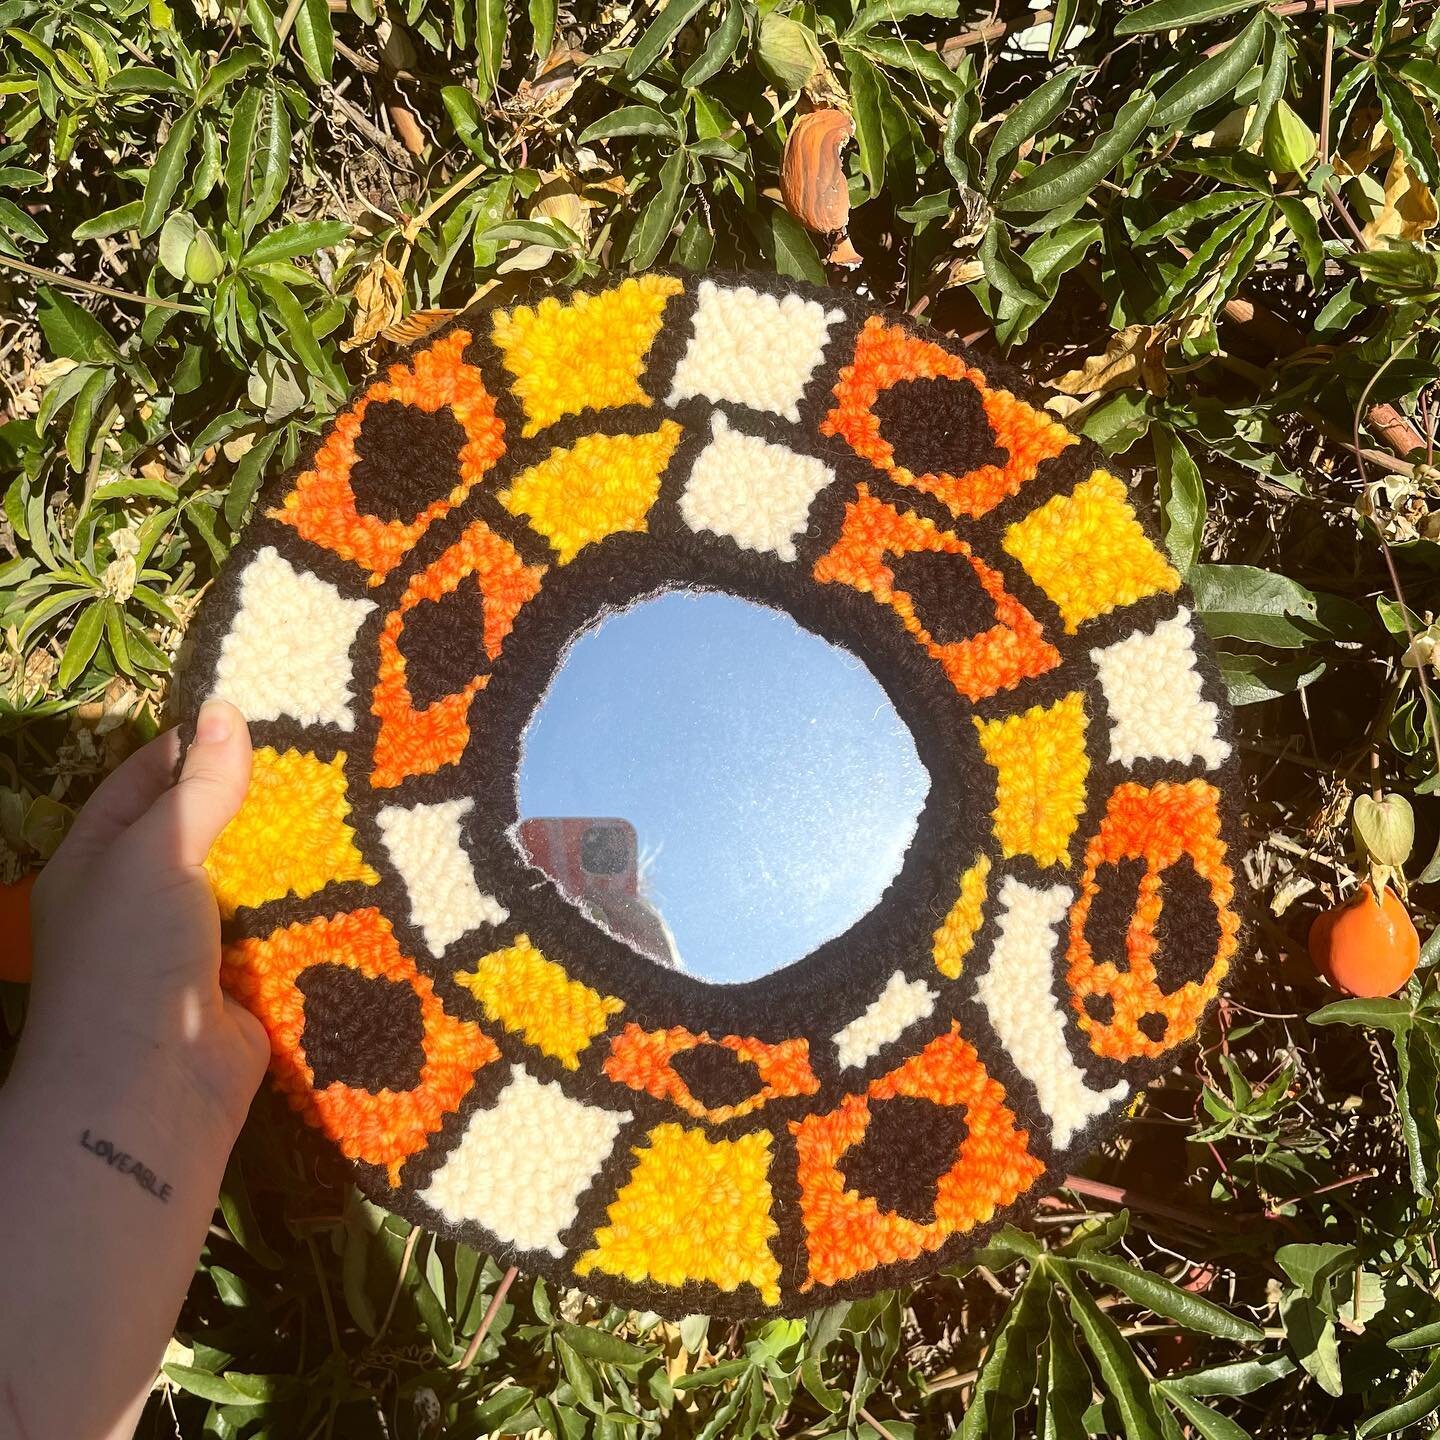 Back from the dead with belated photos of my little snake mirror. Avail for purchase (dm me) 🐍

#punchneedle #storytellerwool #punchmirror #fiberart #snakeart #punchneedlerughooking #punchneedleart #oxfordpunchneedle